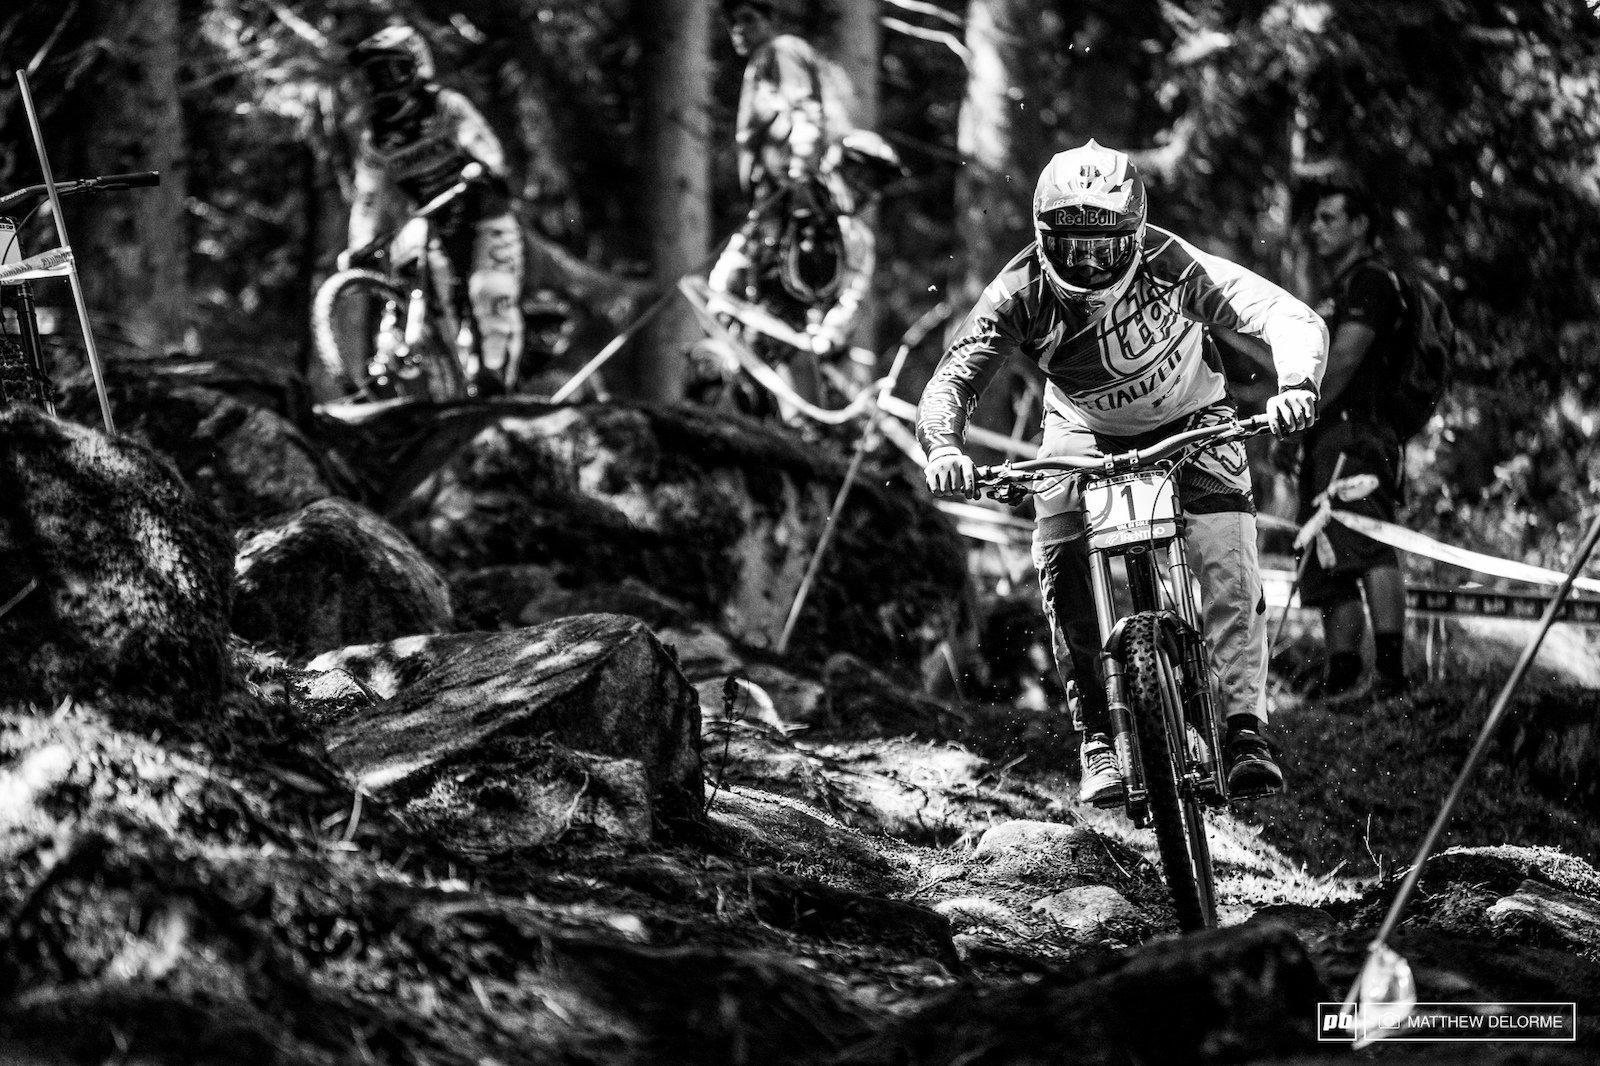 Gwin was quickly looking up to speed as he negotiated his way through the rough terrain.